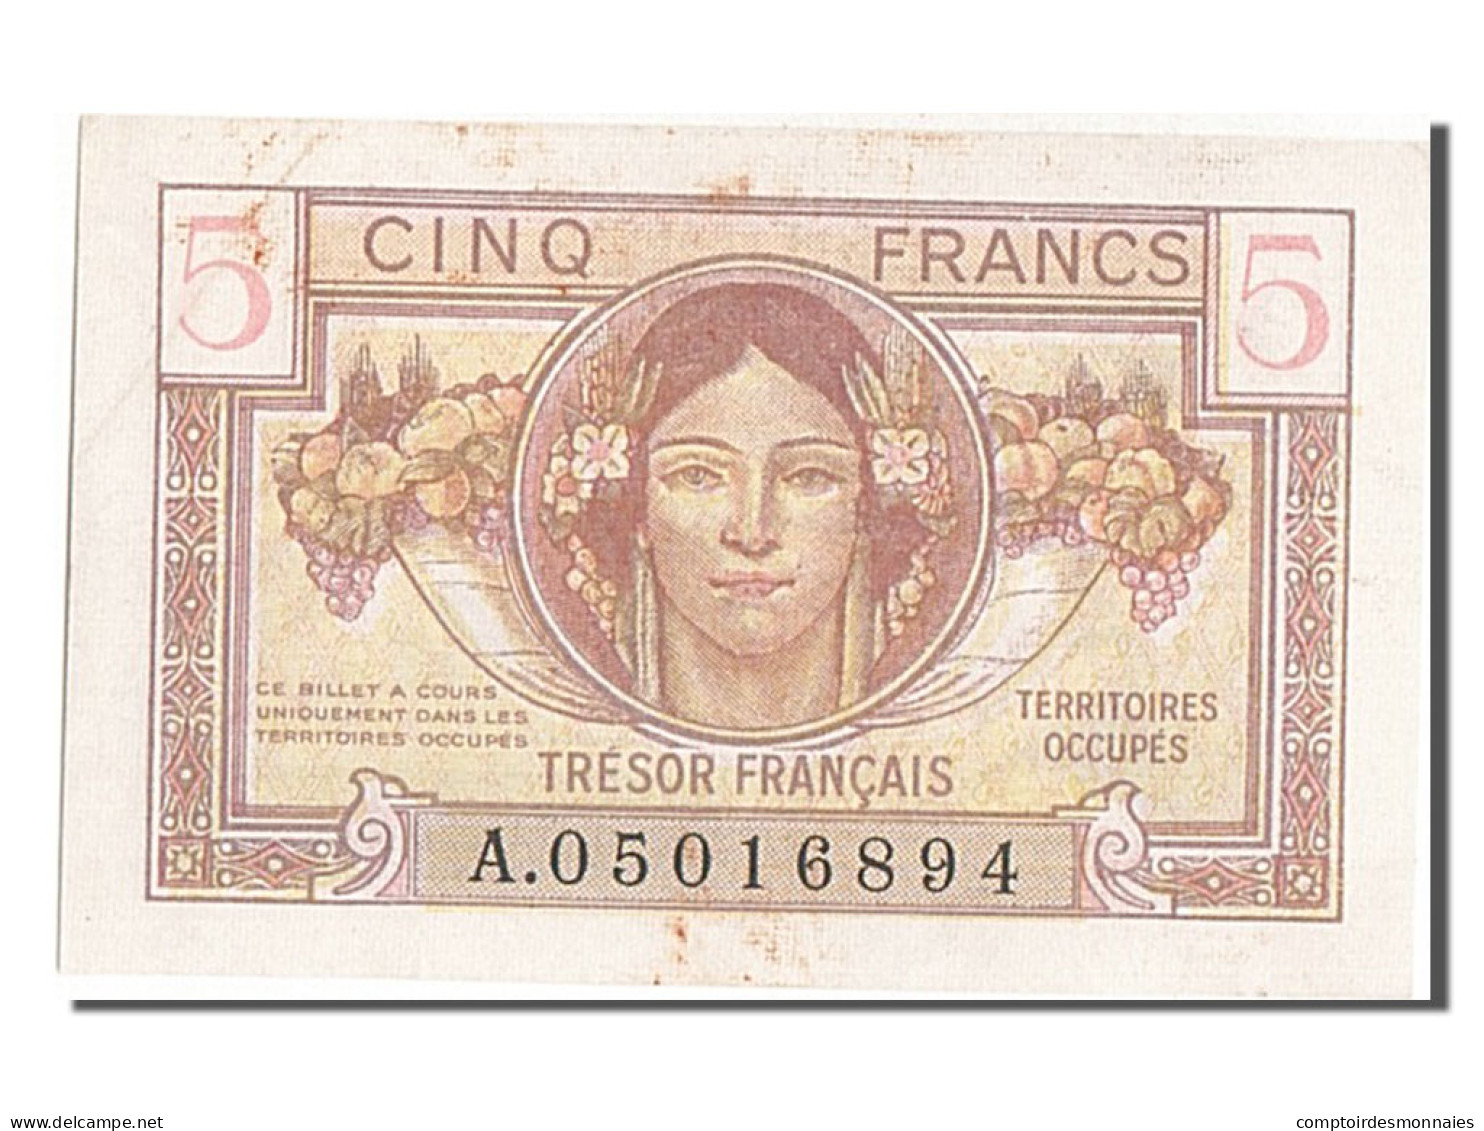 Billet, France, 10 Francs, 1947 French Treasury, 1947, SUP, Fayette:VF29.1 - 1947 French Treasury